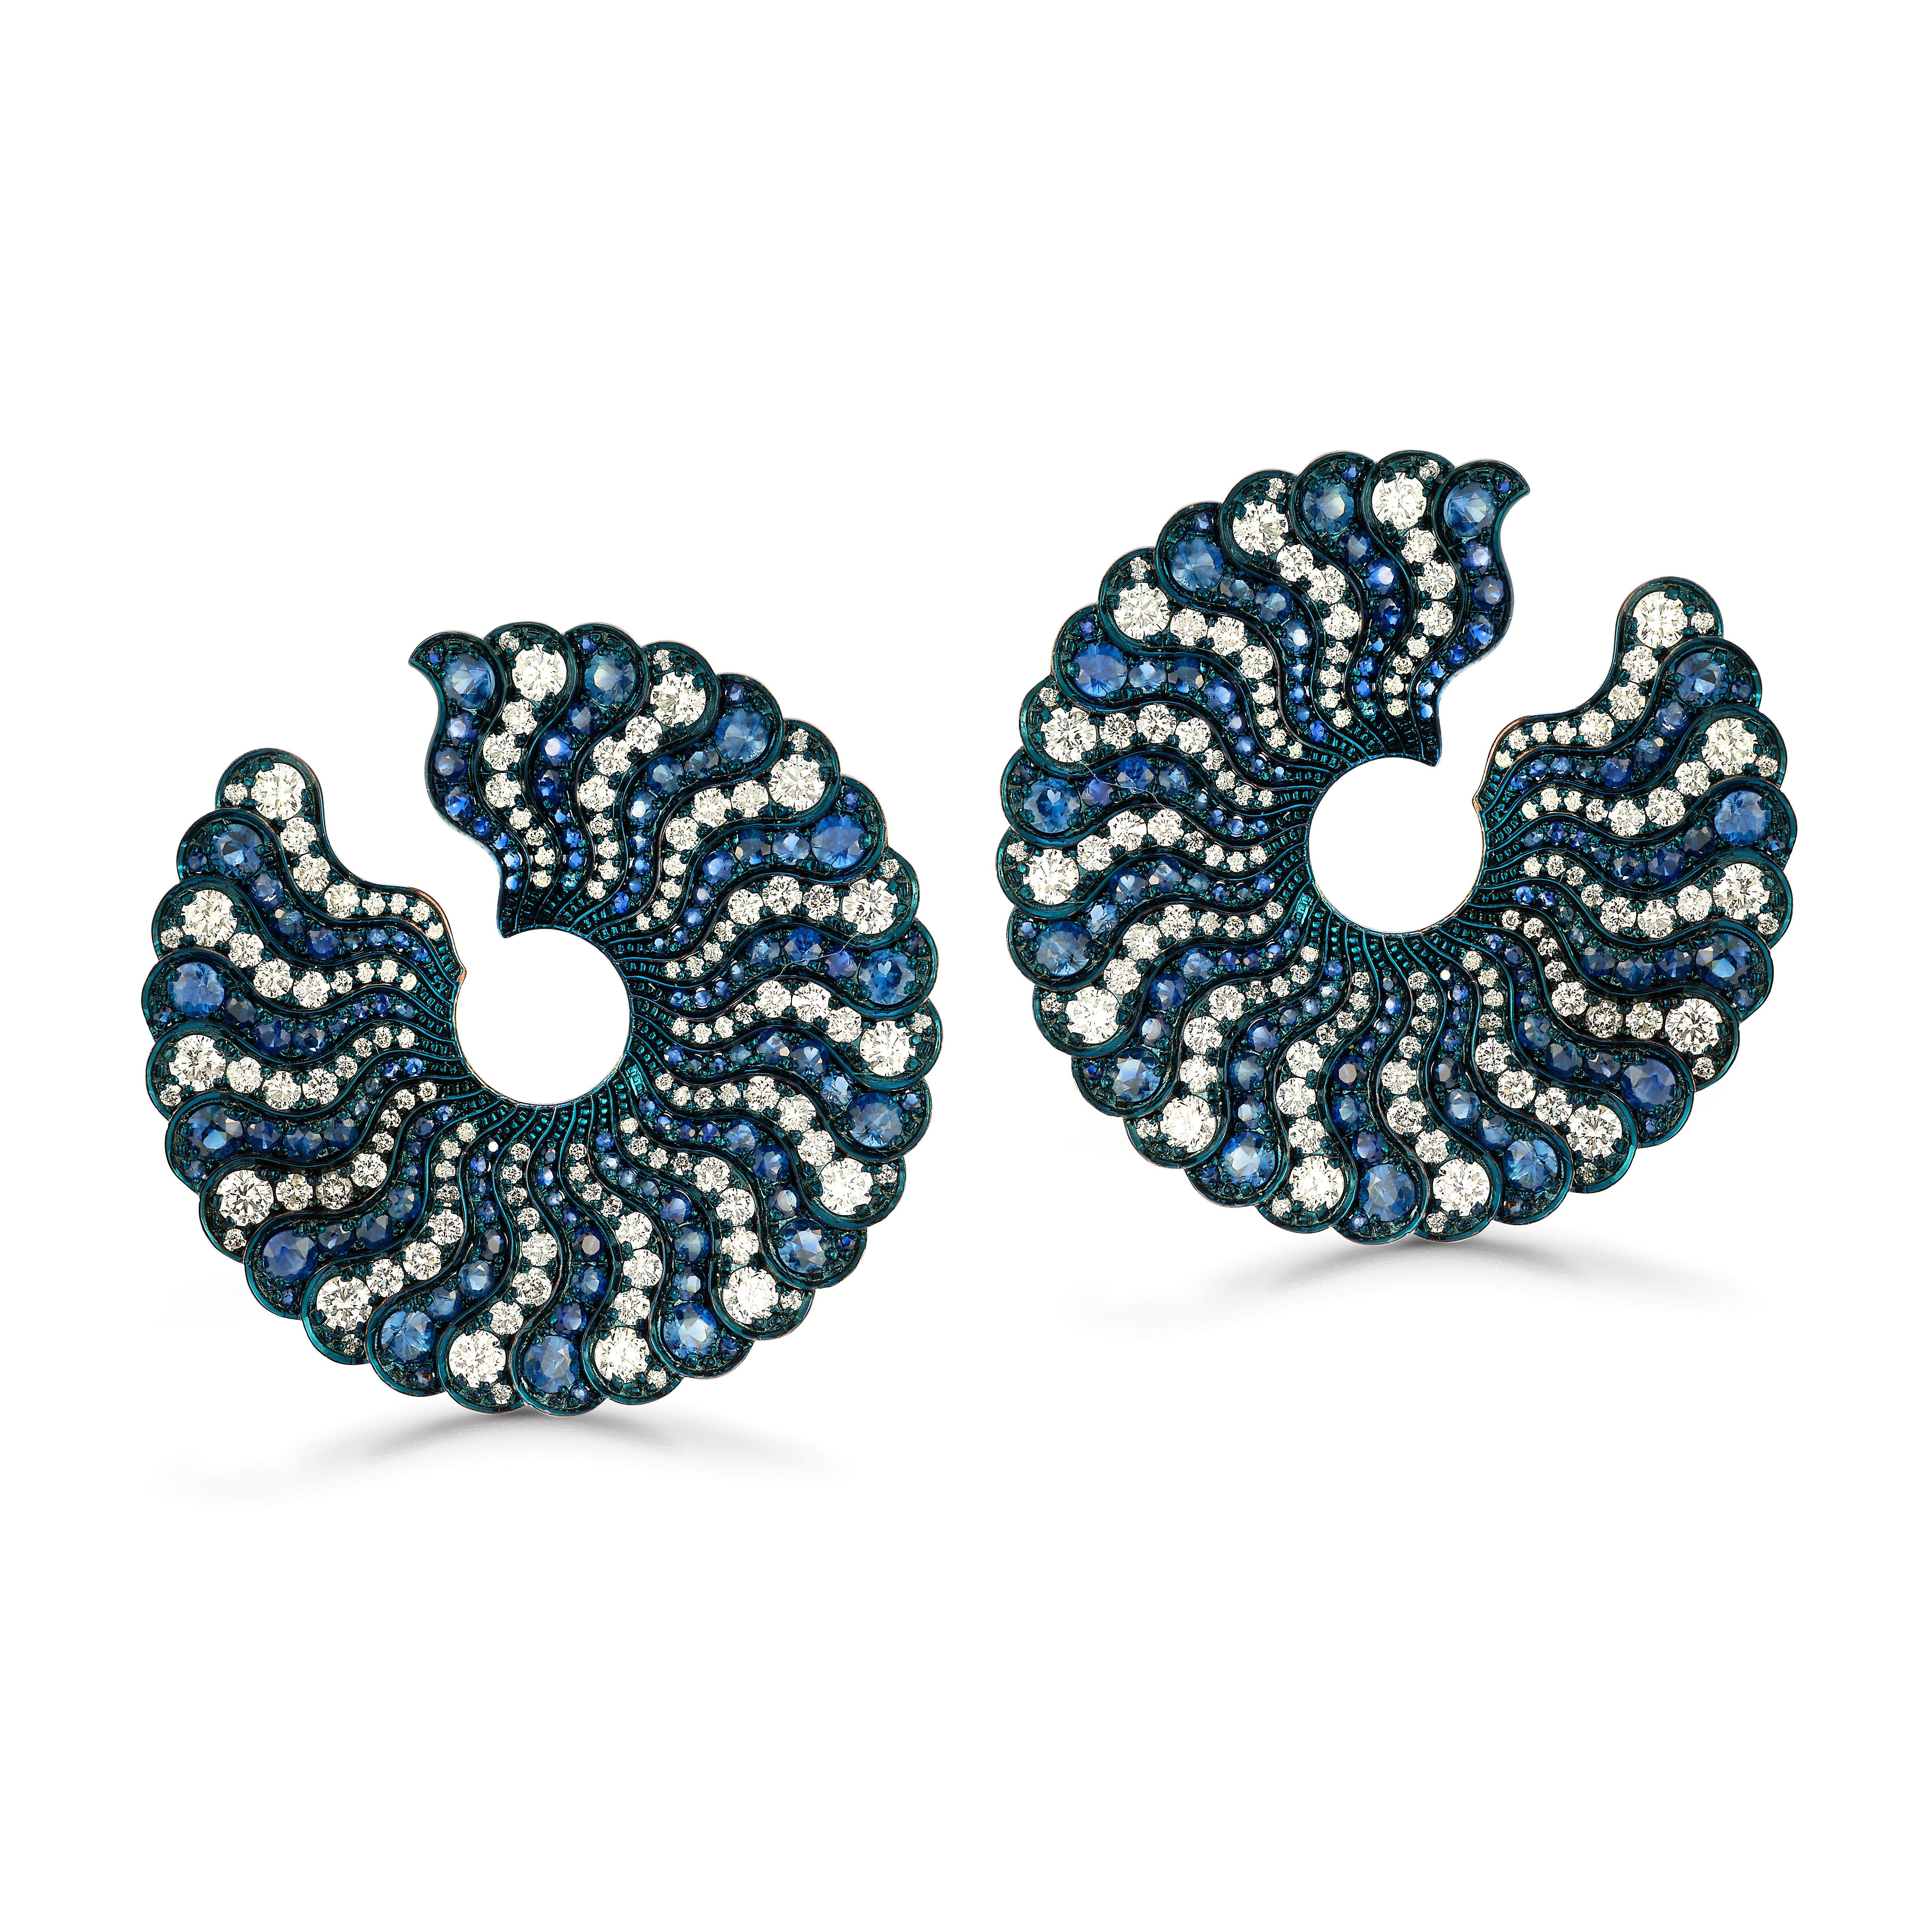 Sapphire and Diamond Earrings

A pair of 18 karat gold circular earrings set with alternating rows of diamonds and sapphires

Total Approximate Diamond Weight: 4.5 carats
Total Approximate Sapphire Weight: 6 carats

Back Type: Clip-on with